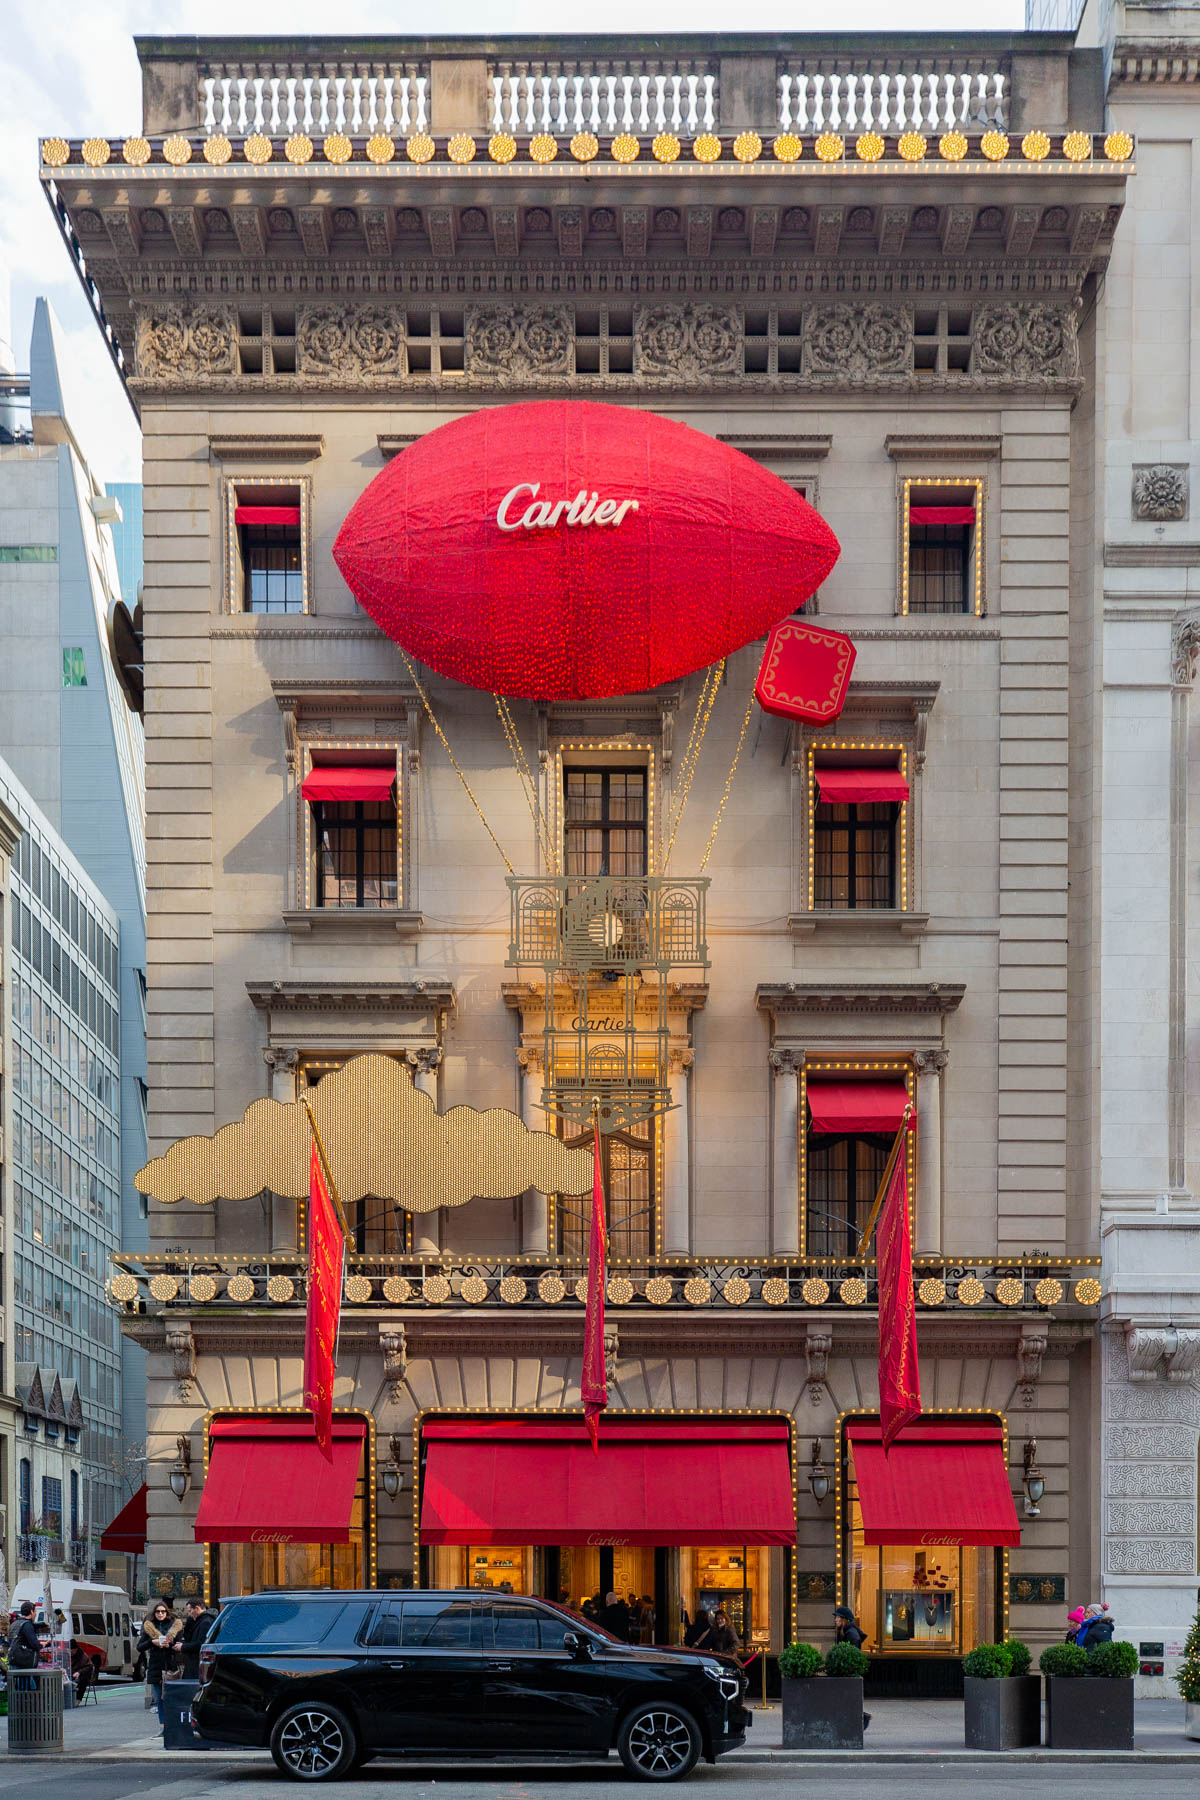 Cartier Christmas Decorations on Fifth Avenue